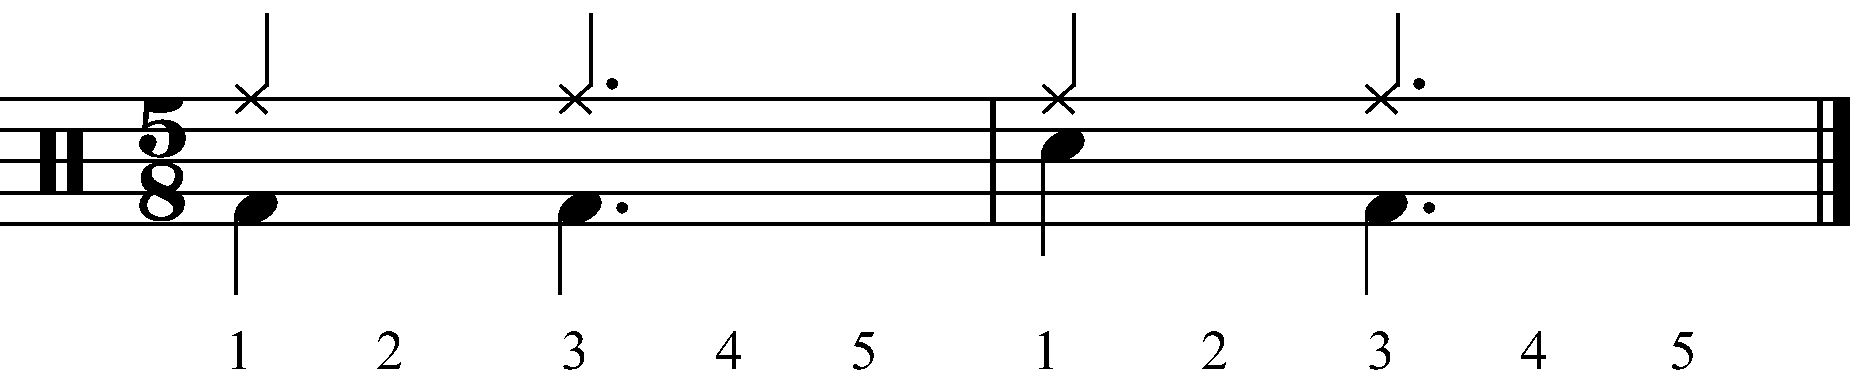 A ghosted 16 note groove